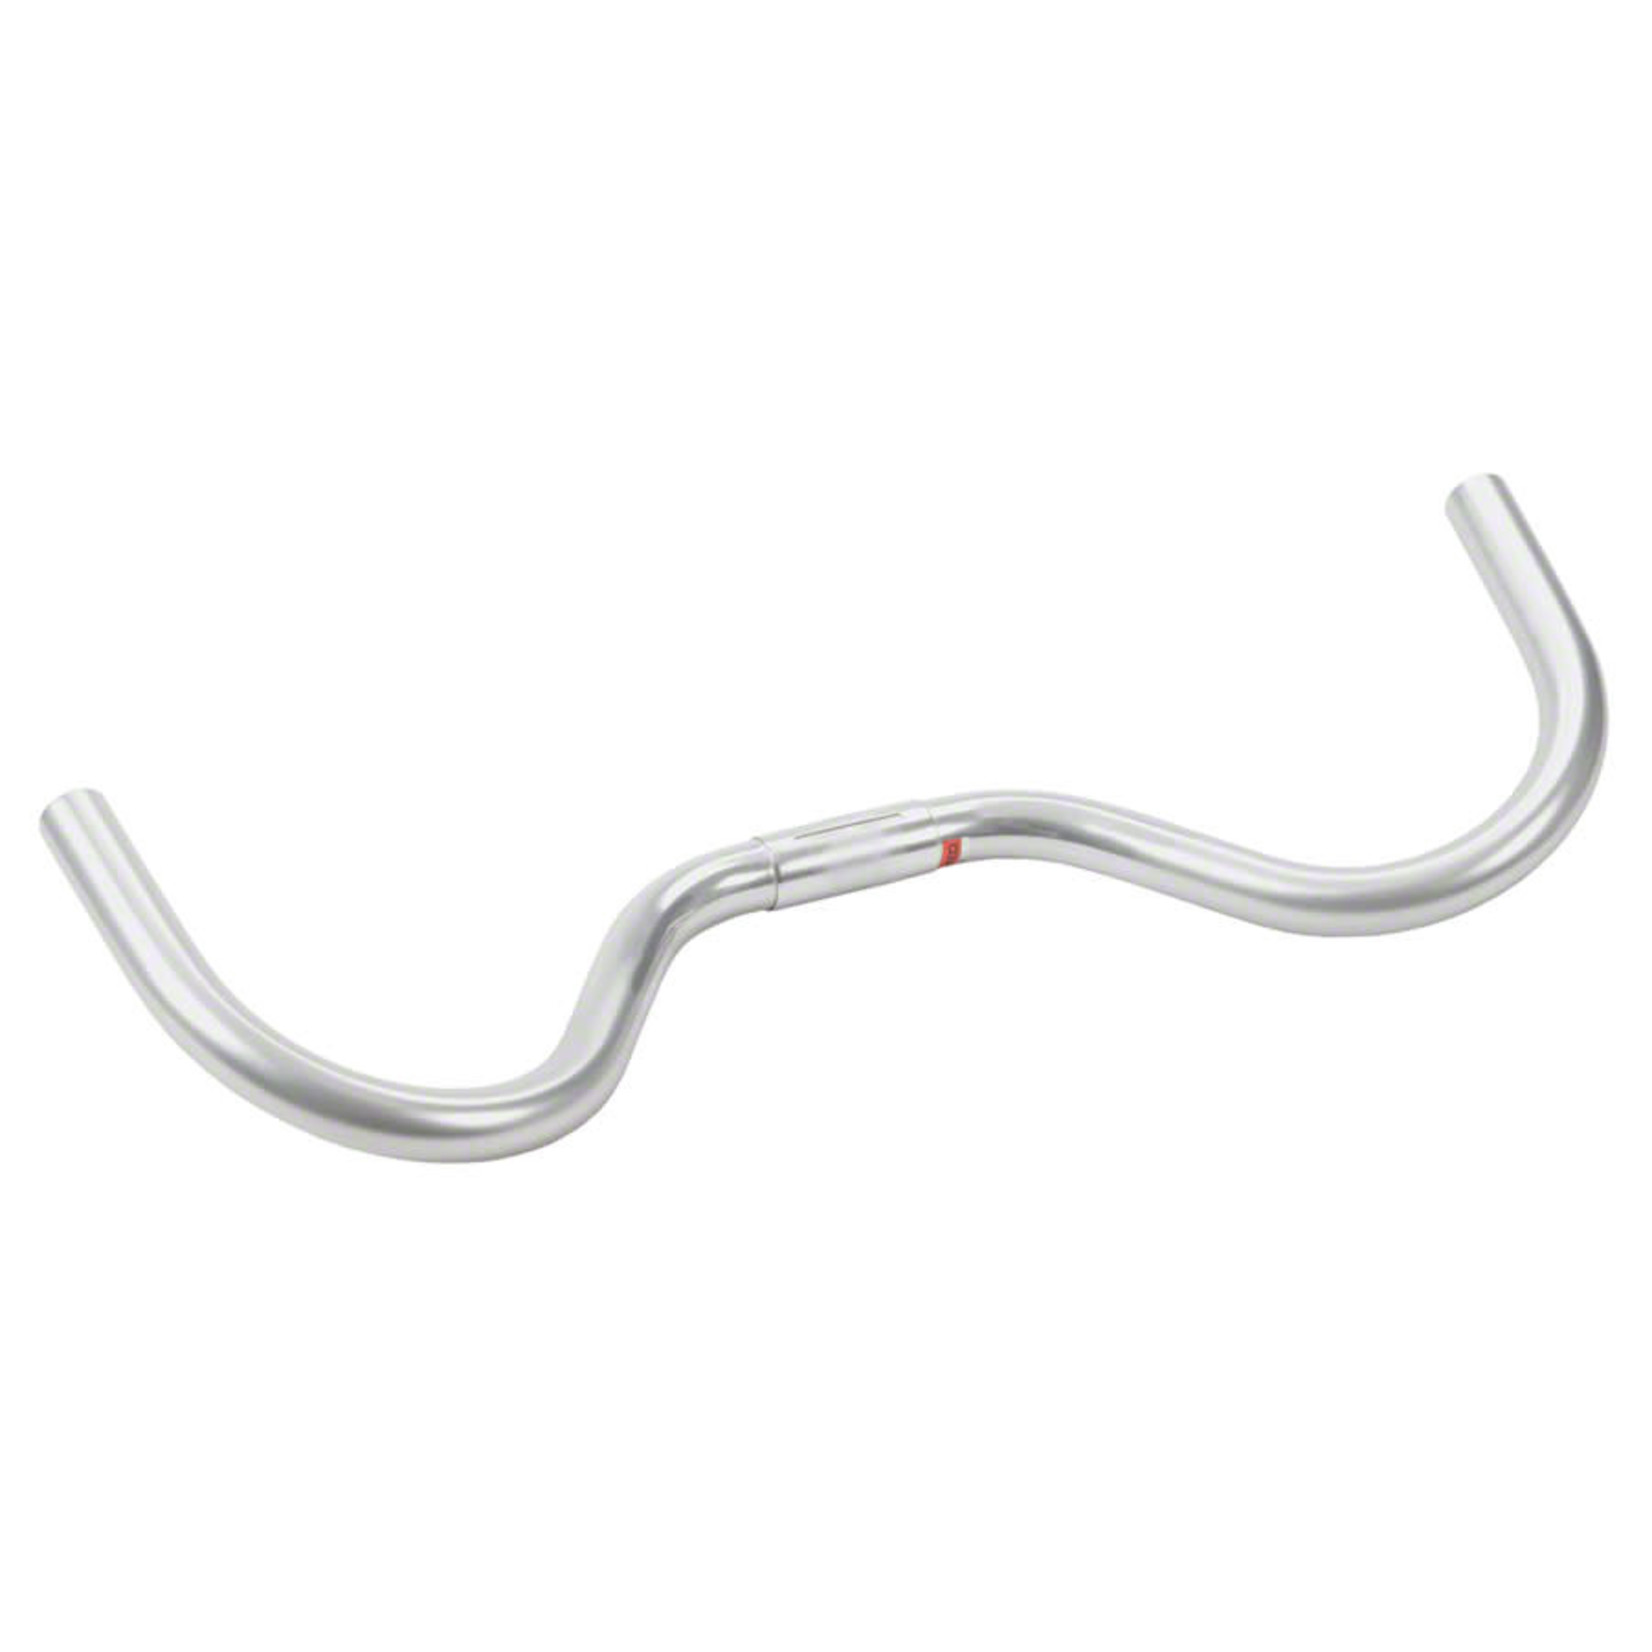 Nitto Nitto Moustache Handlebar: 26.0mm Bar Clamp 515mm Width Alloy Silver